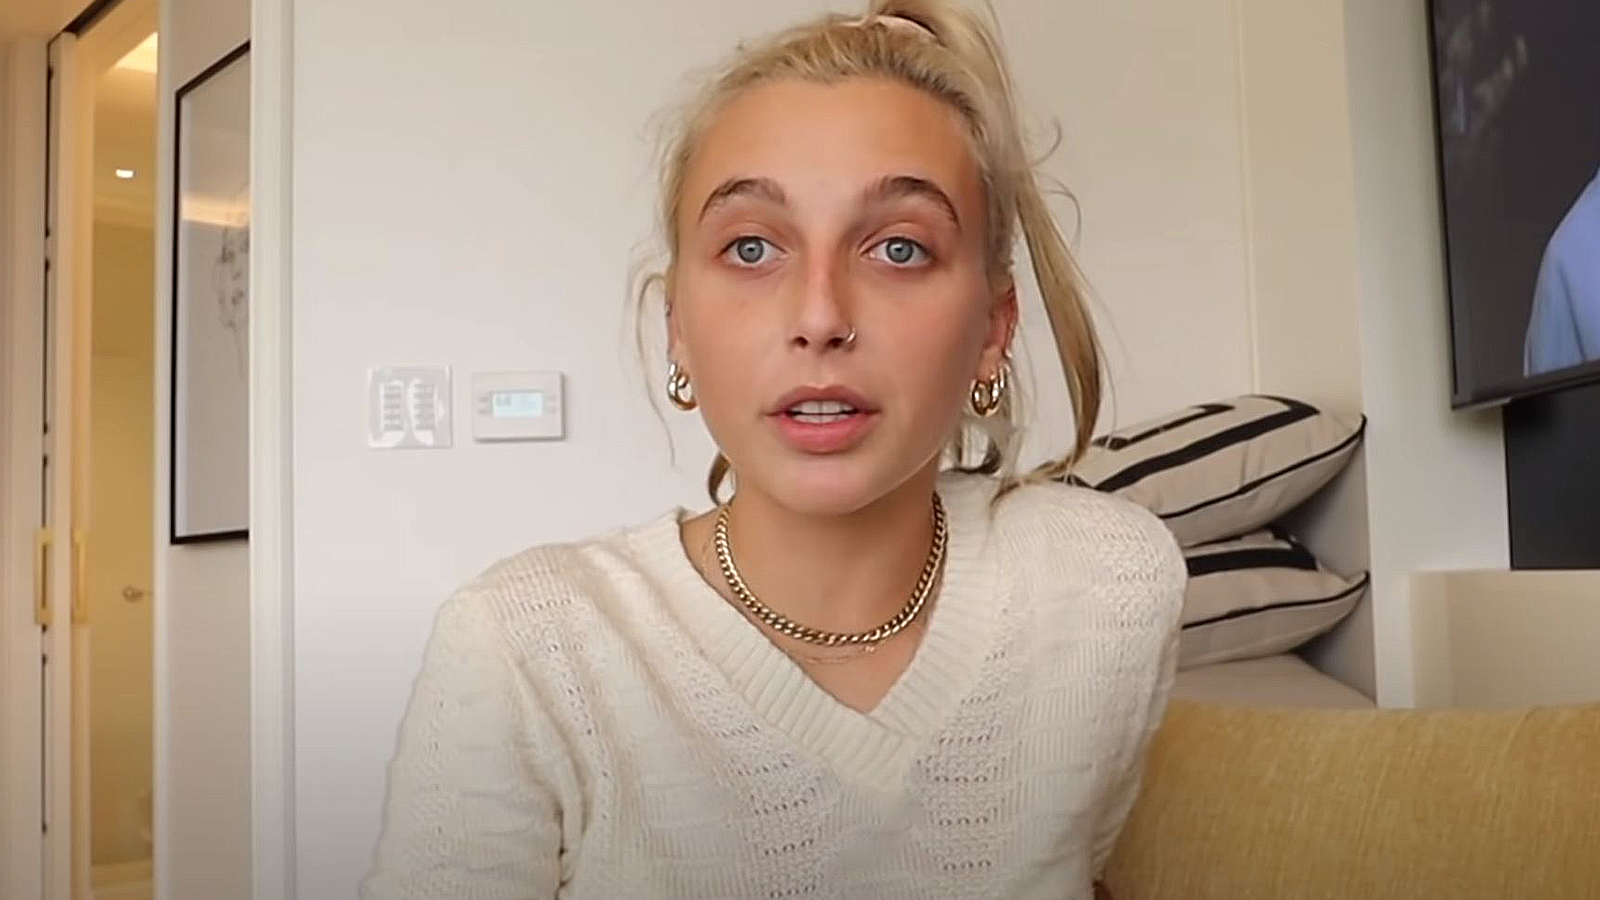 Who Is Emma Chamberlain Dating in 2020?